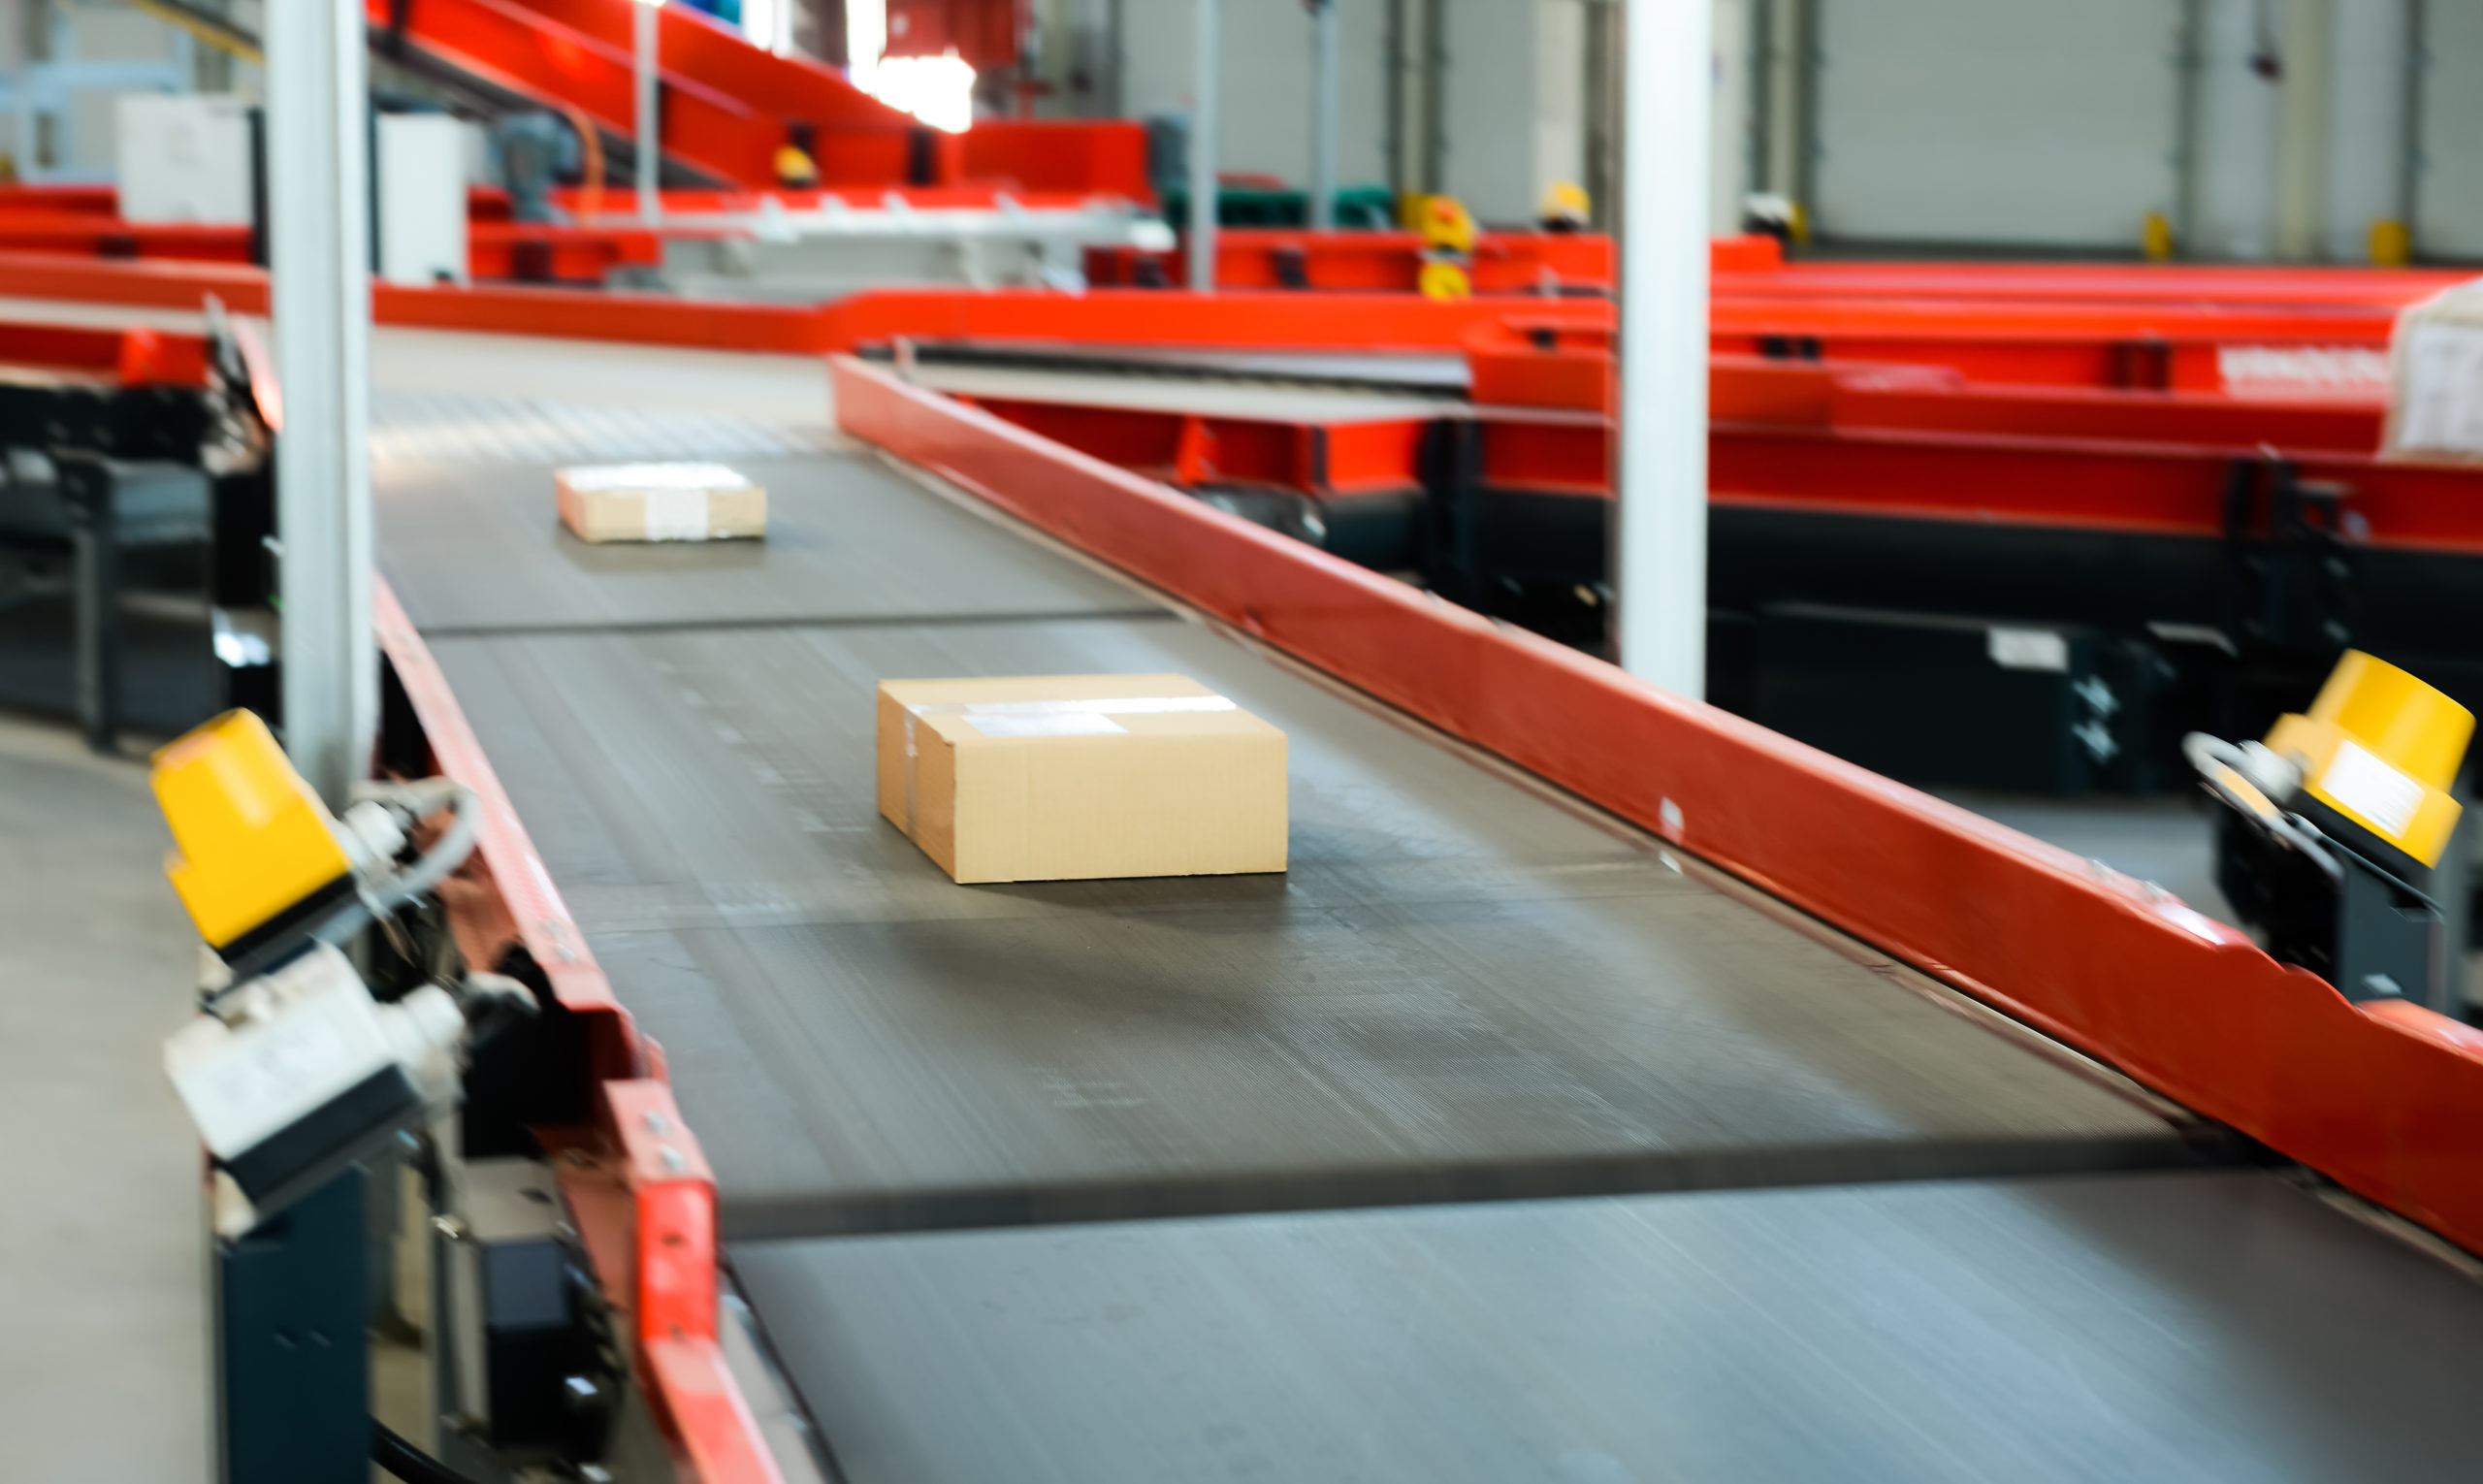 packages-moving-on-conveyor-automation-solutions